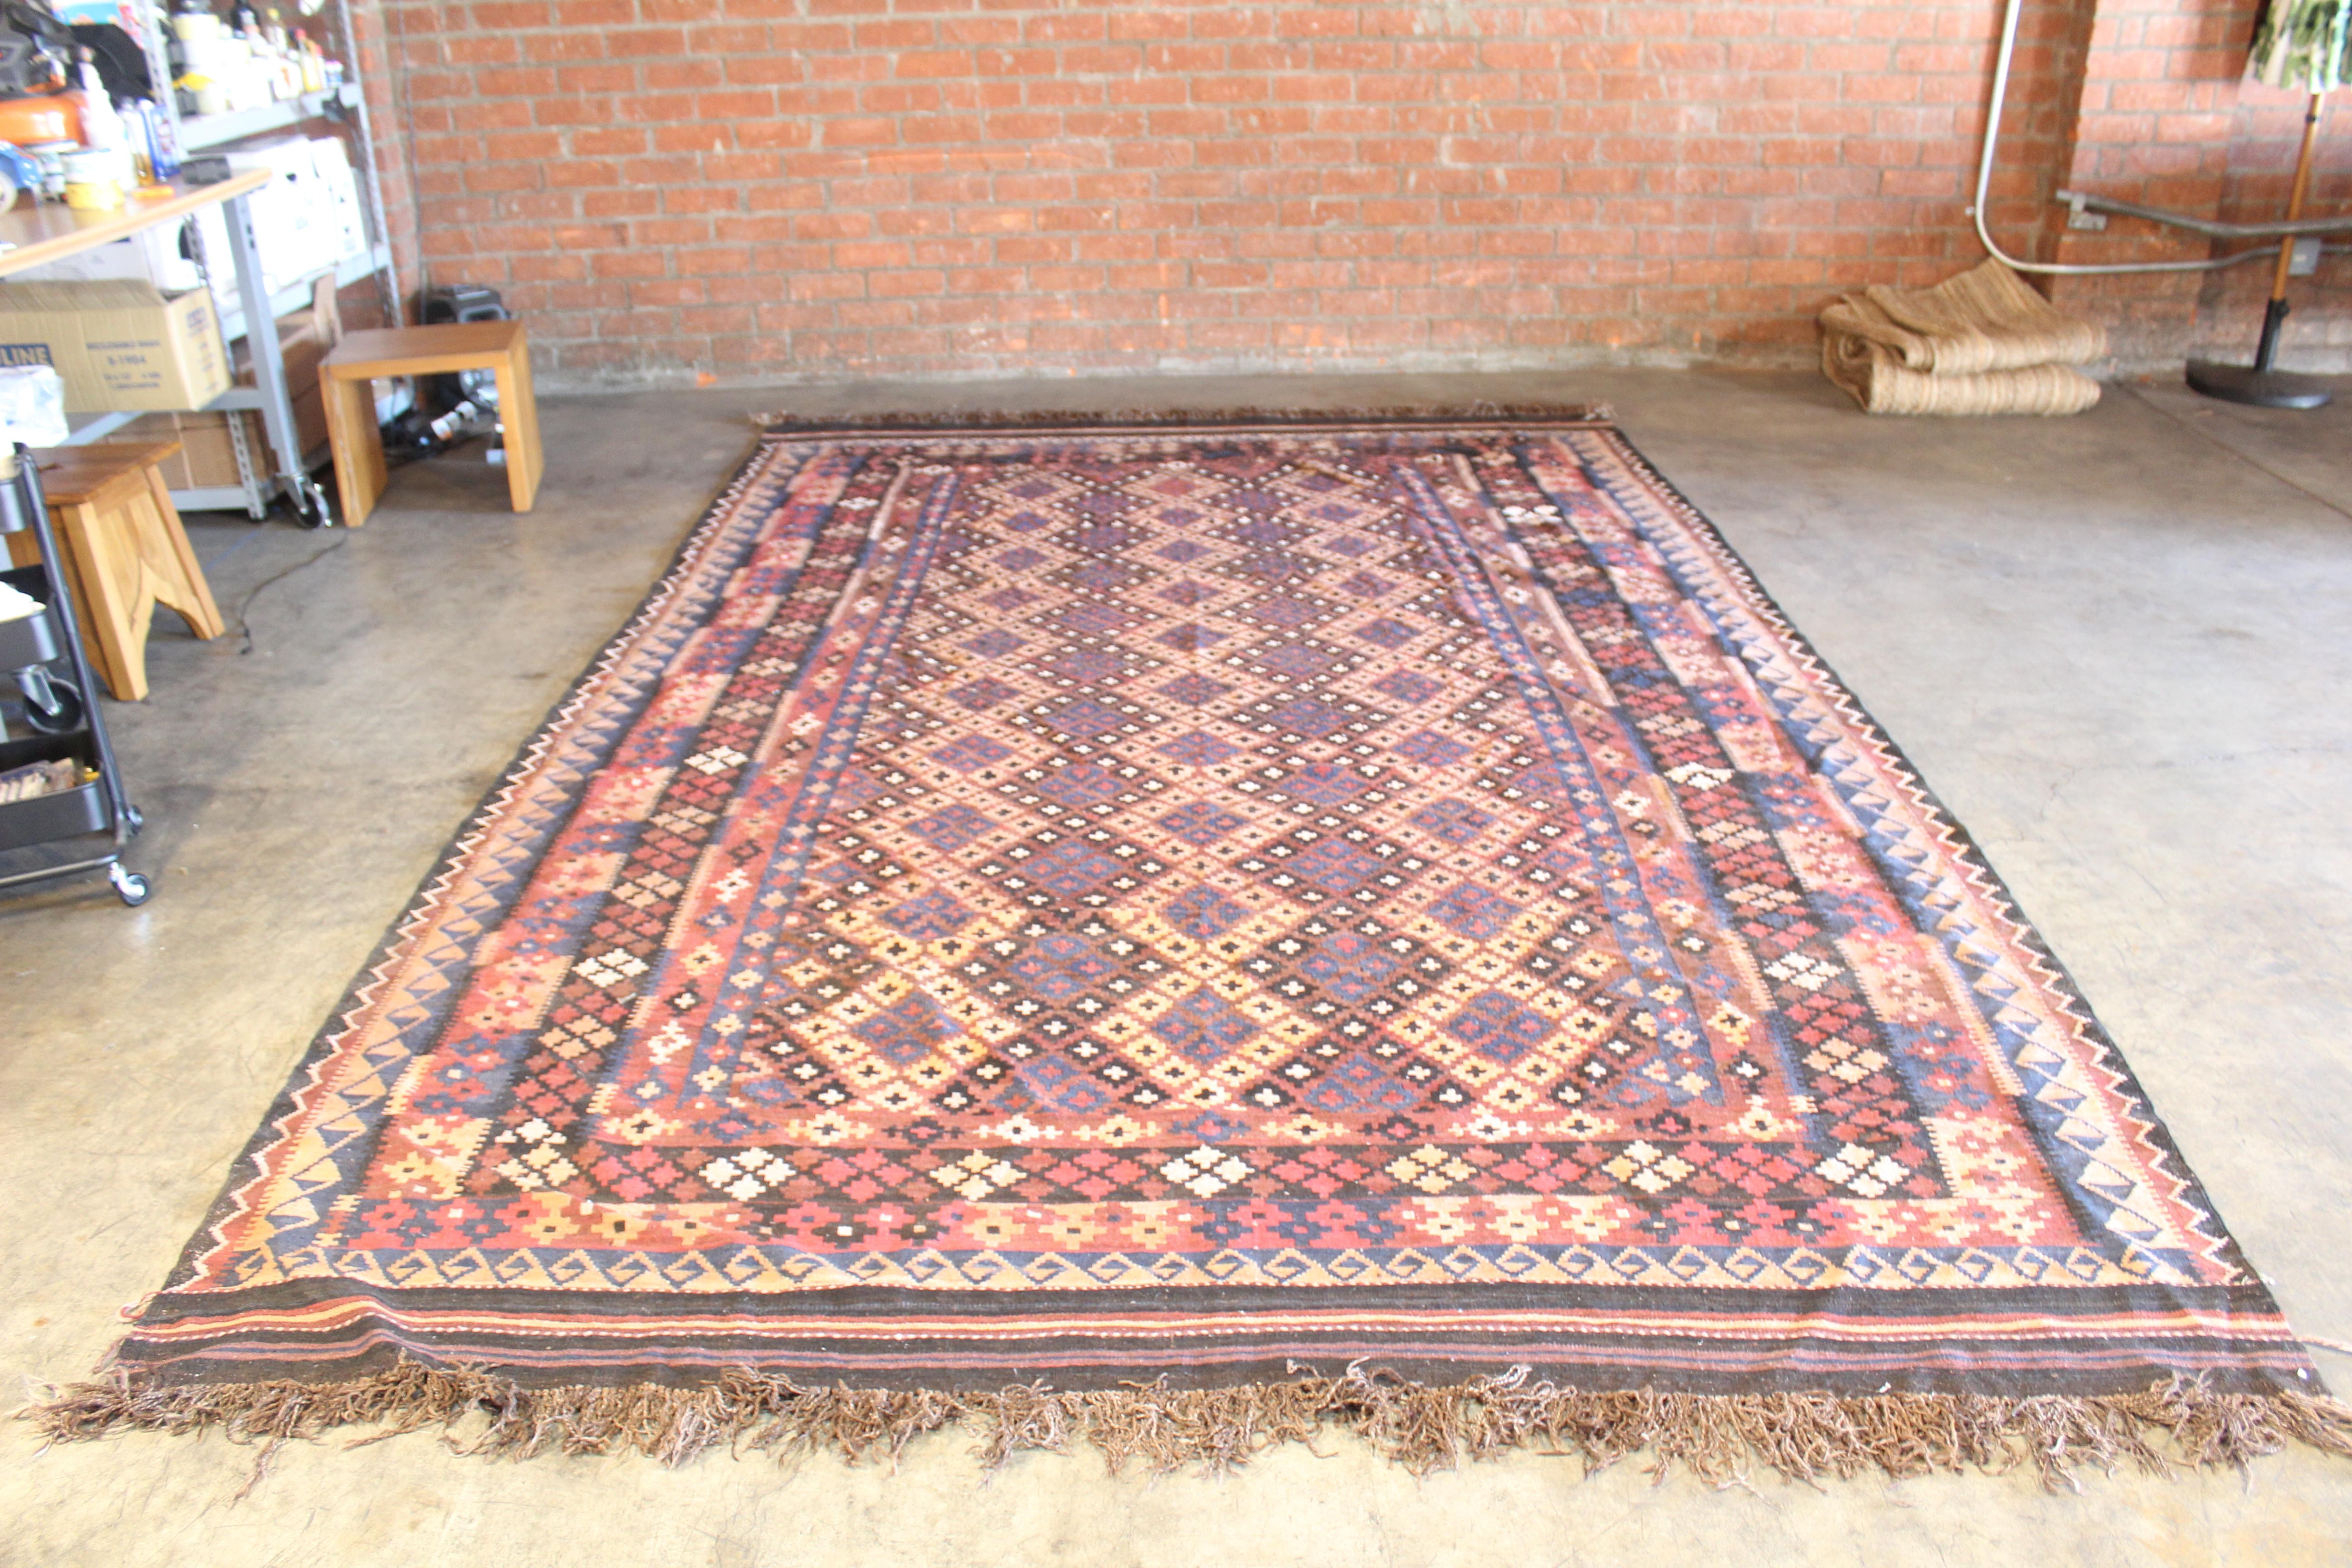 A large, room-sized, vintage 1960s Turkish flatweave wool kilim rug. In excellent condition, no stains, rips or tears.